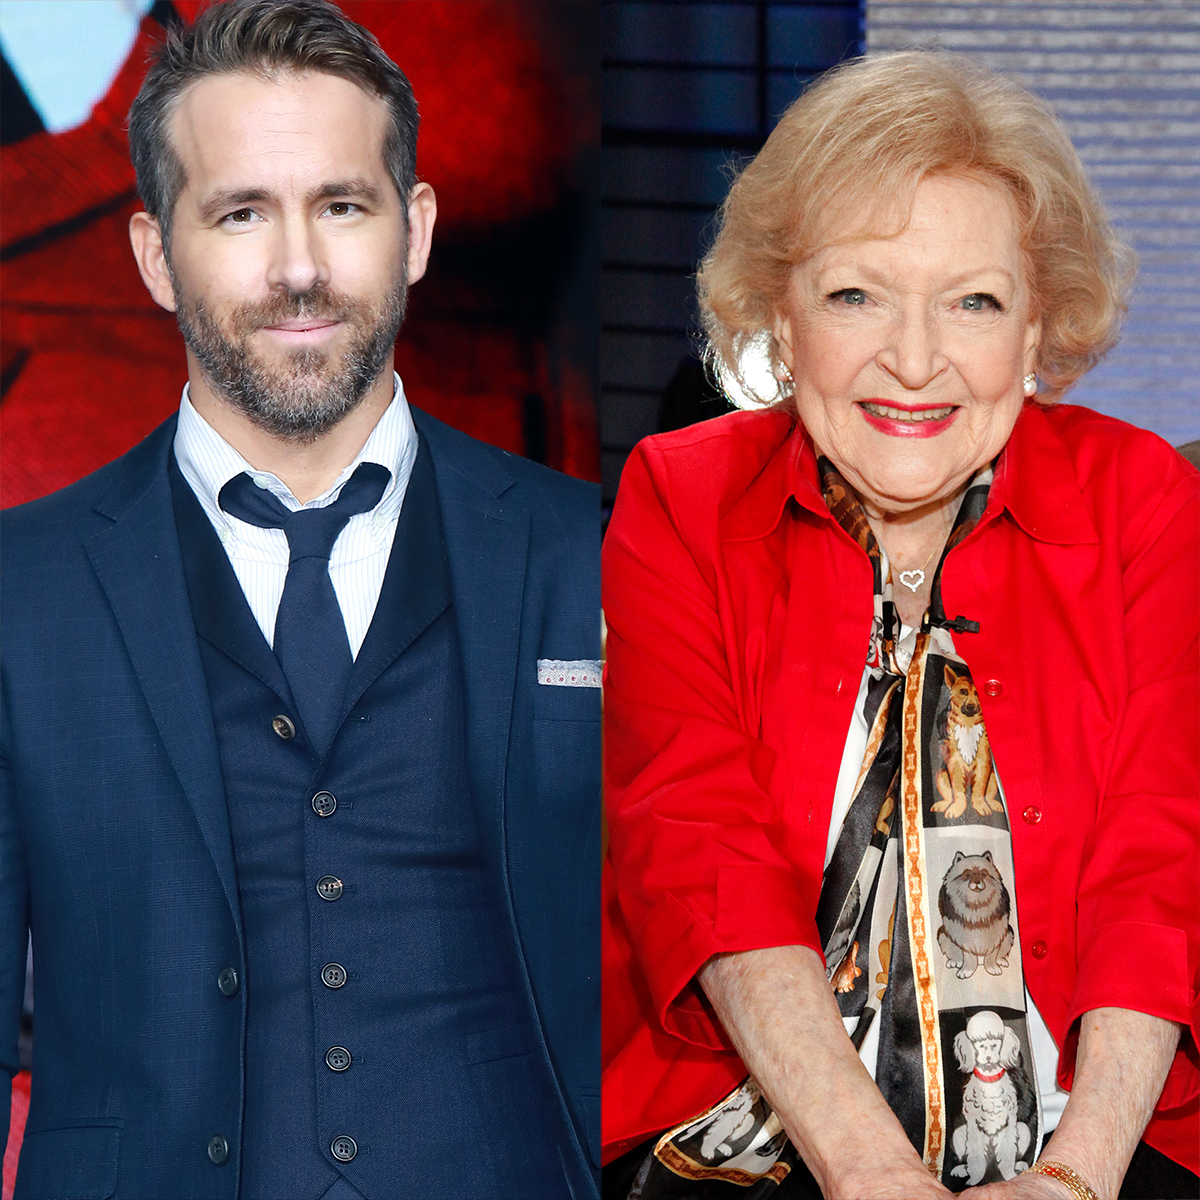 https://akns-images.eonline.com/eol_images/Entire_Site/20211130/rs_1200x1200-211230035704-1200-Ryan-Reynolds-Betty-White-123021-Split.jpg?fit=around%7C1200:1200&output-quality=90&crop=1200:1200;center,top